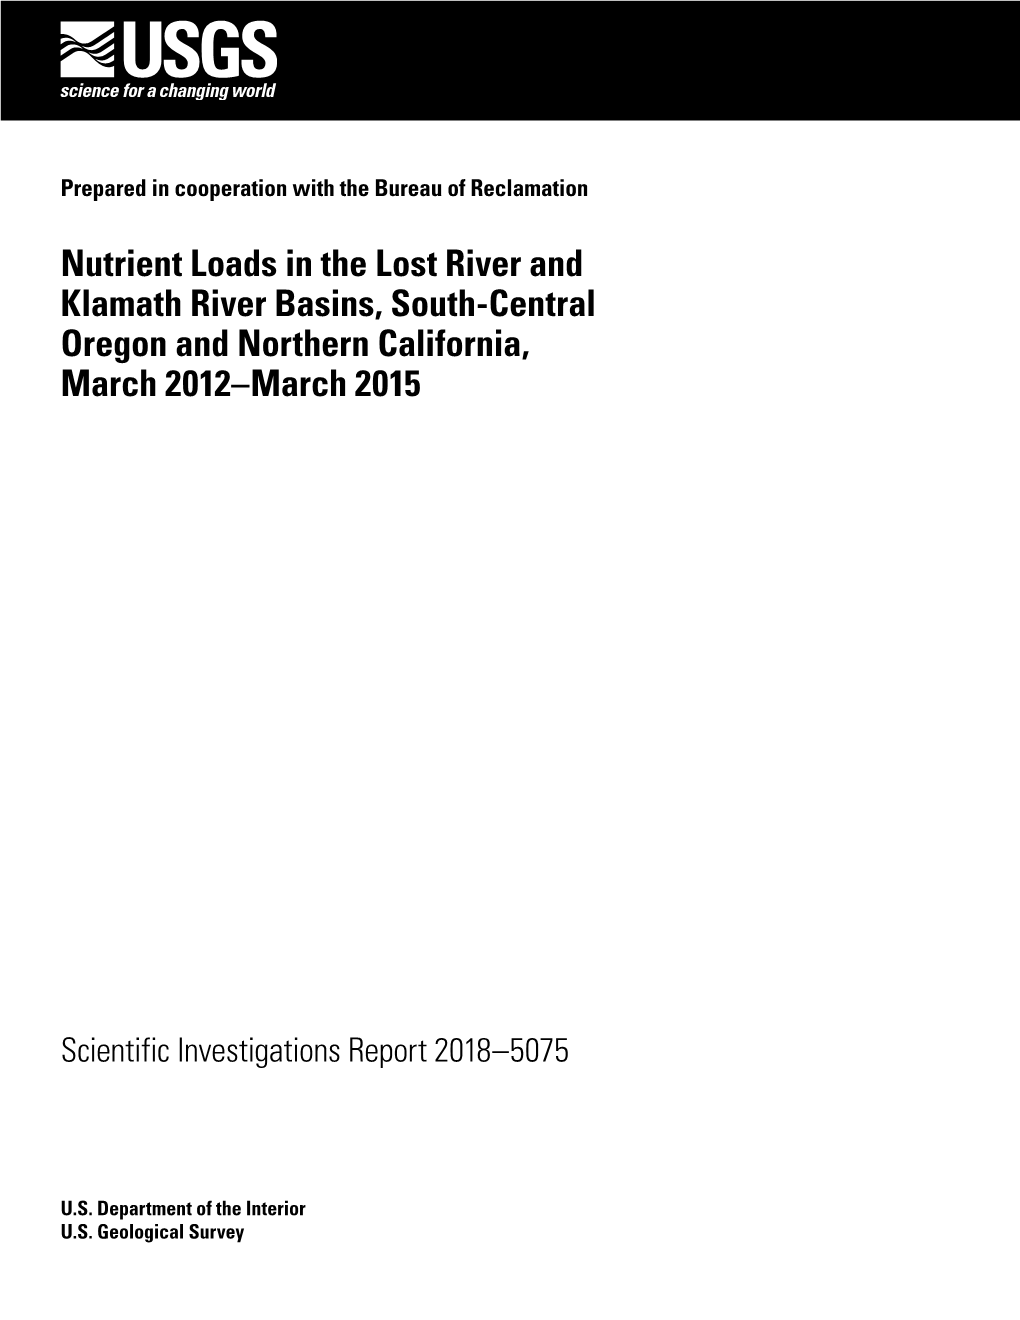 Nutrient Loads in the Lost River and Klamath River Basins, South-Central Oregon and Northern California, March 2012–March 2015